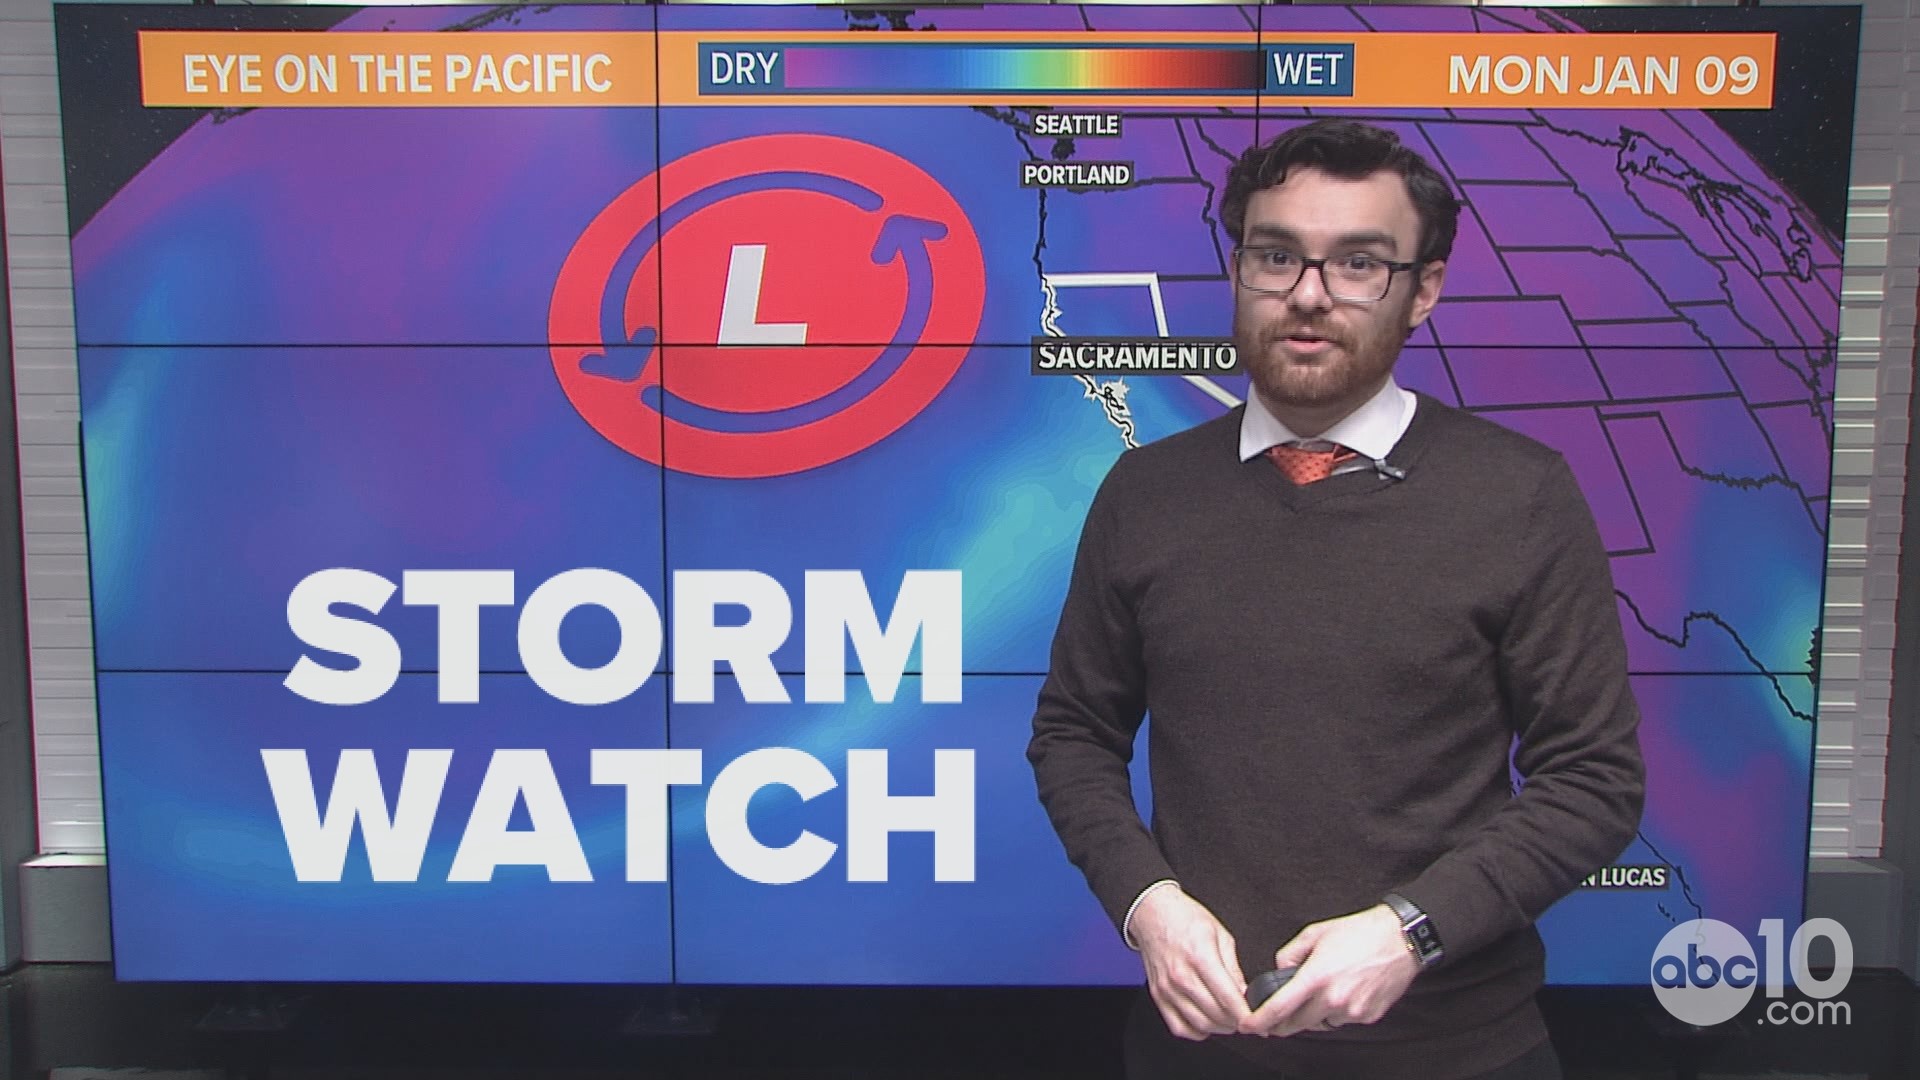 ABC10 meteorologist Brenden Mincheff has the latest forecast for this weekend, plus the details on a strong atmospheric river that arrives on Monday.